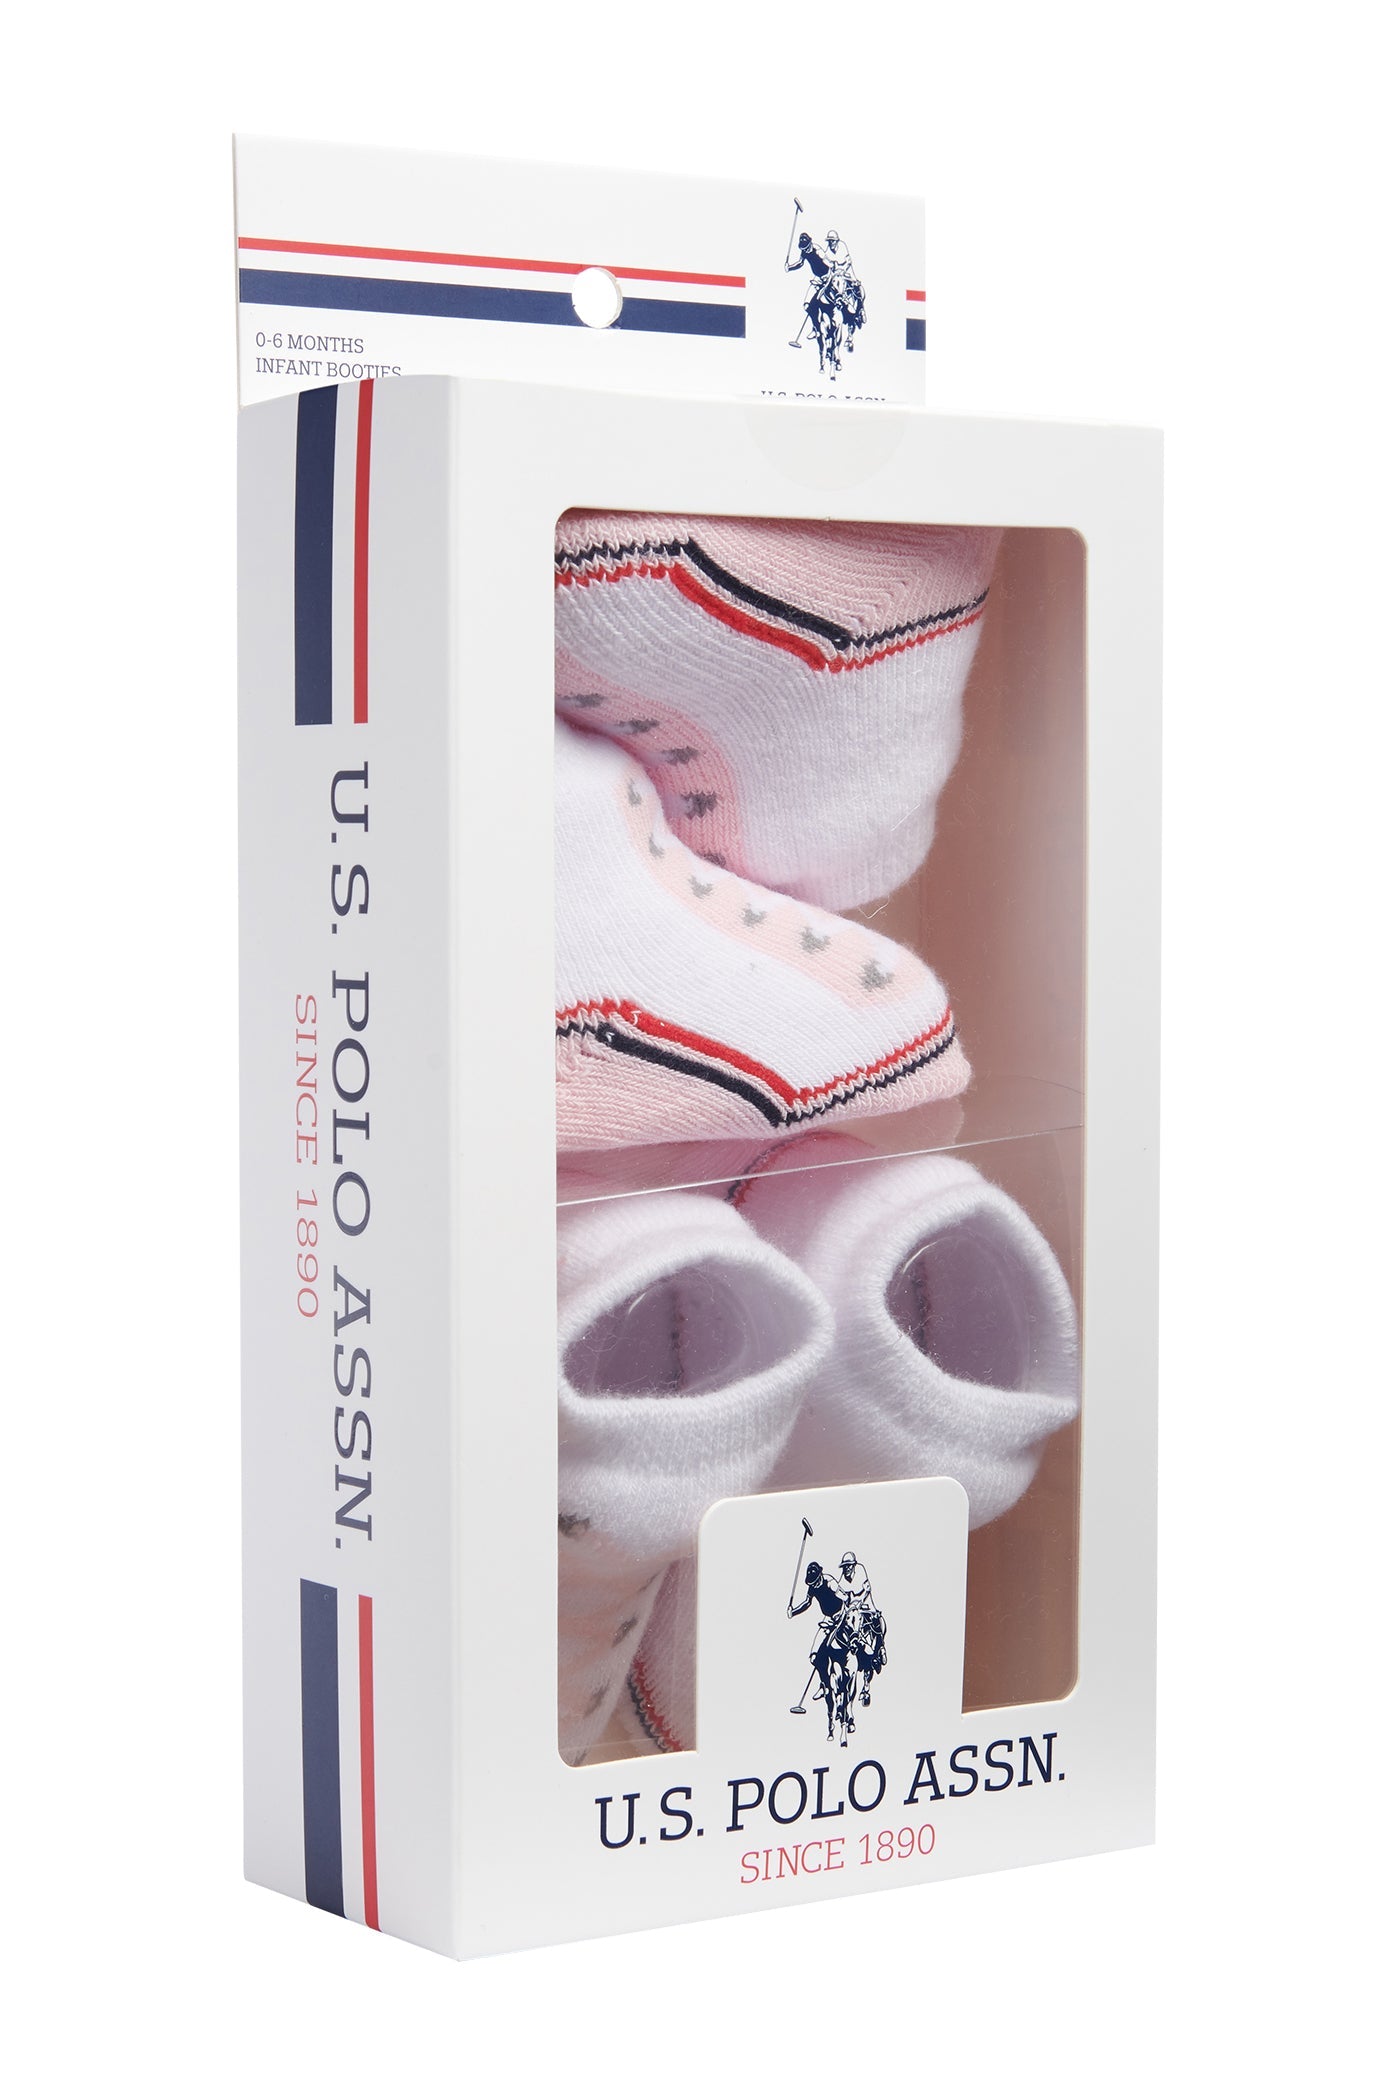 U.S. Polo Assn. Baby 2 Piece Boxed Gifting Set in Light Pink